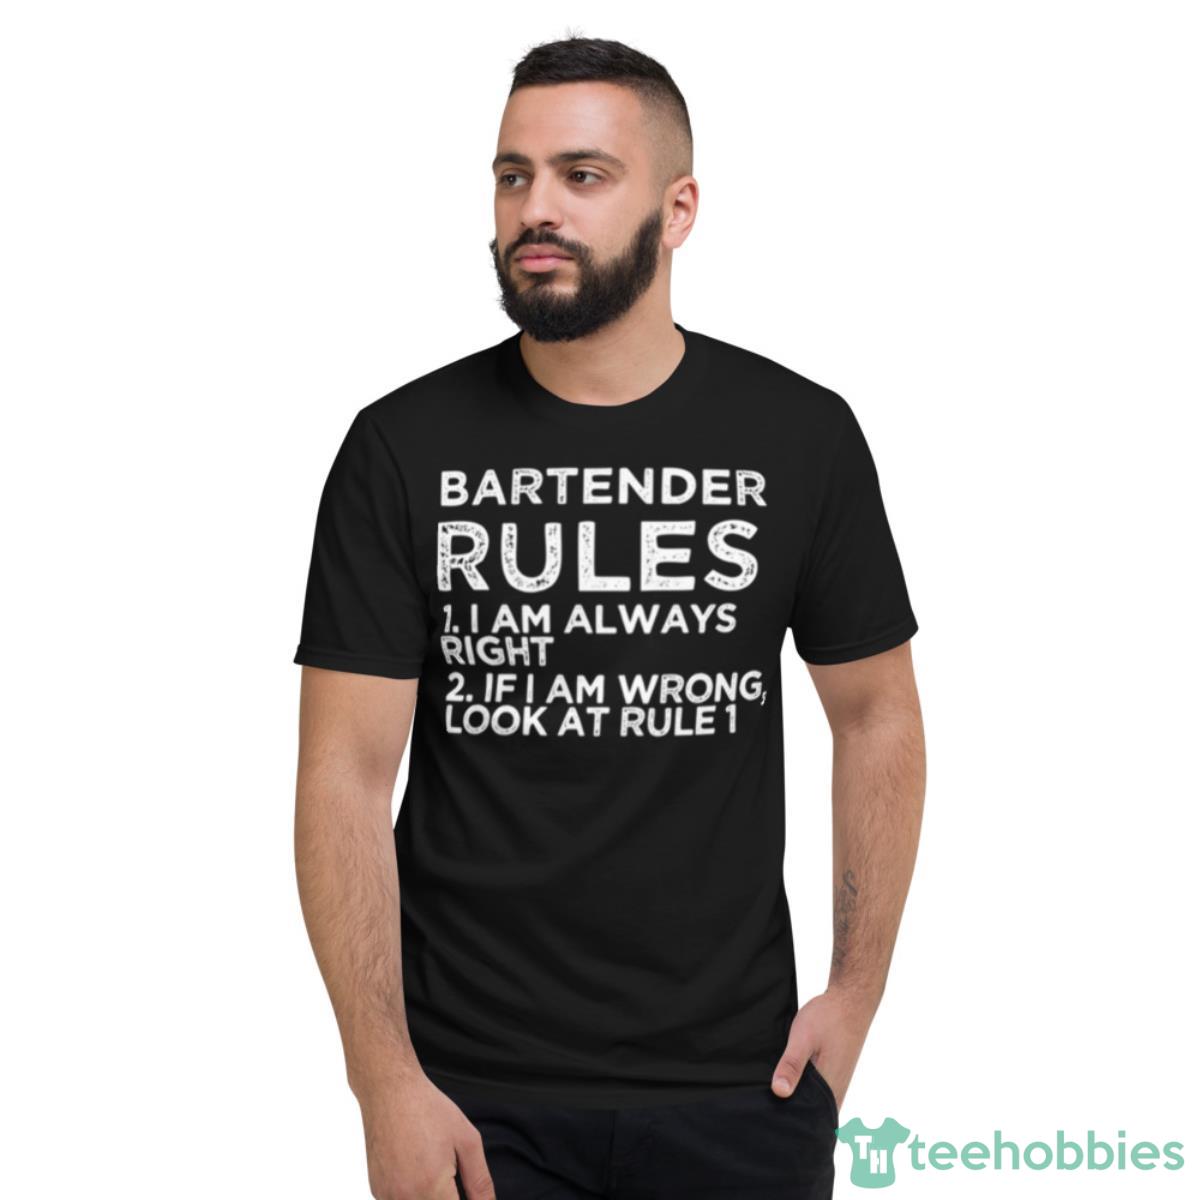 Bartender Rules 1 I Am Always Right 2 If I Am Wrong Look At Rule 1 Shirt - Short Sleeve T-Shirt